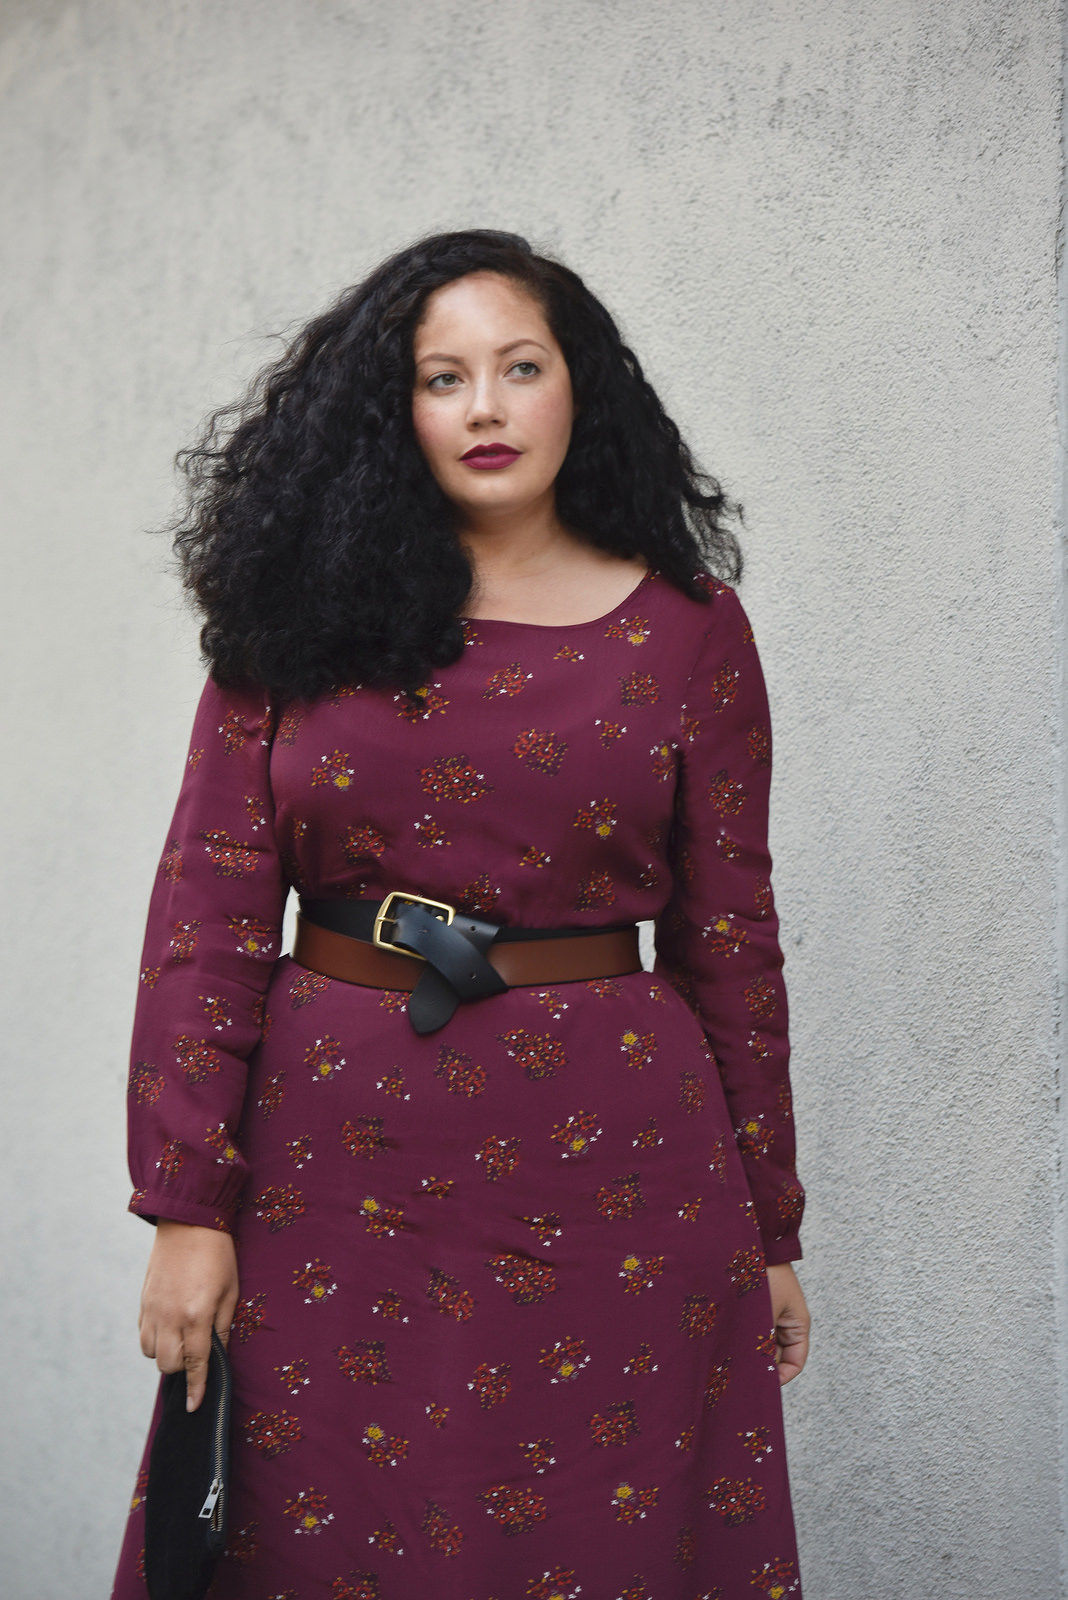 Belted Midi Dress by Girl With Curves.